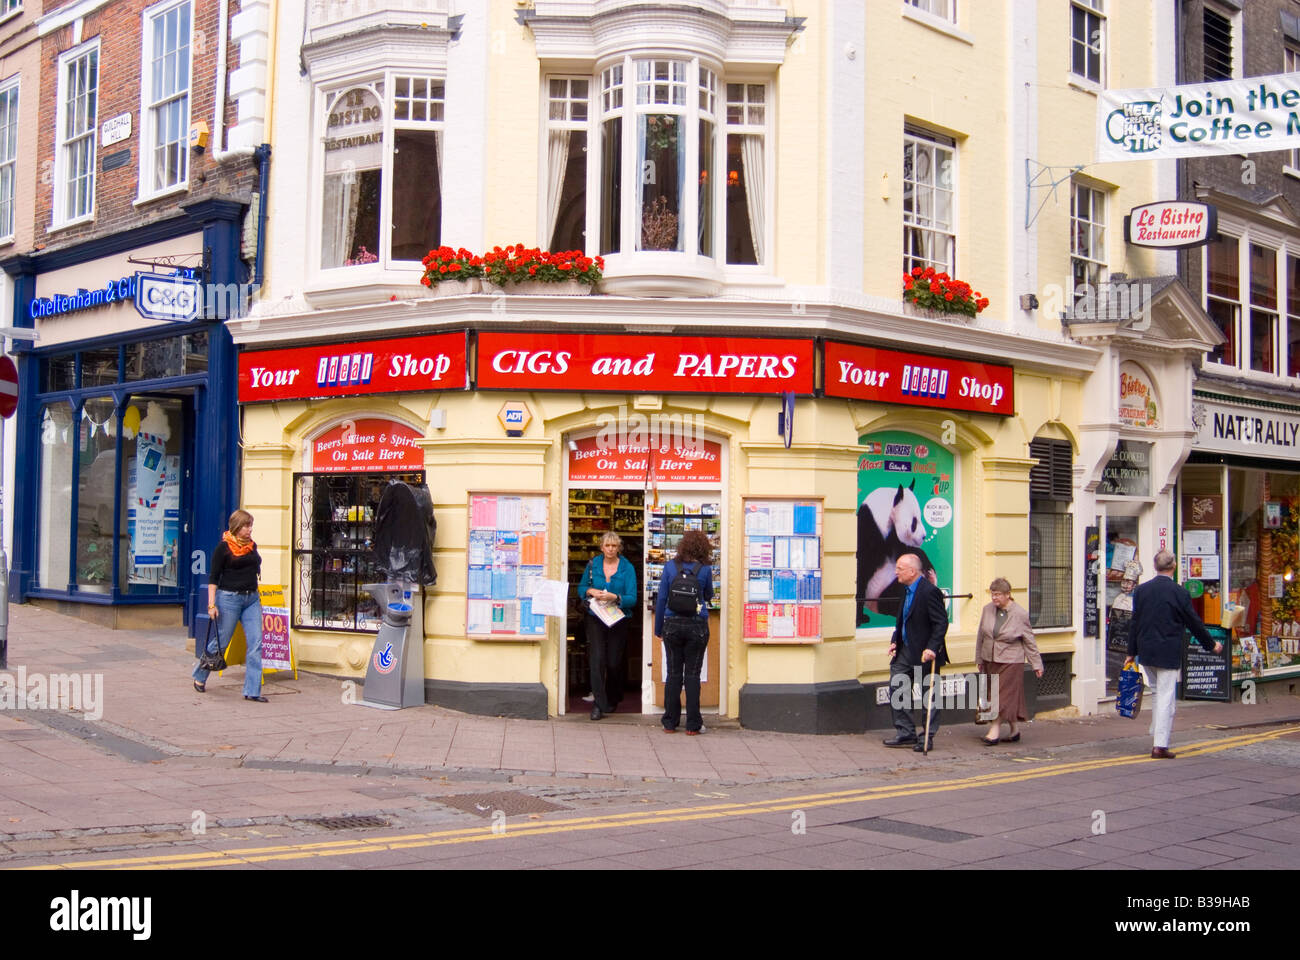 Your ideal shop selling cigs and papers,alcohol,sweets etc.in the city centre of Norwich,Norfolk,Uk Stock Photo